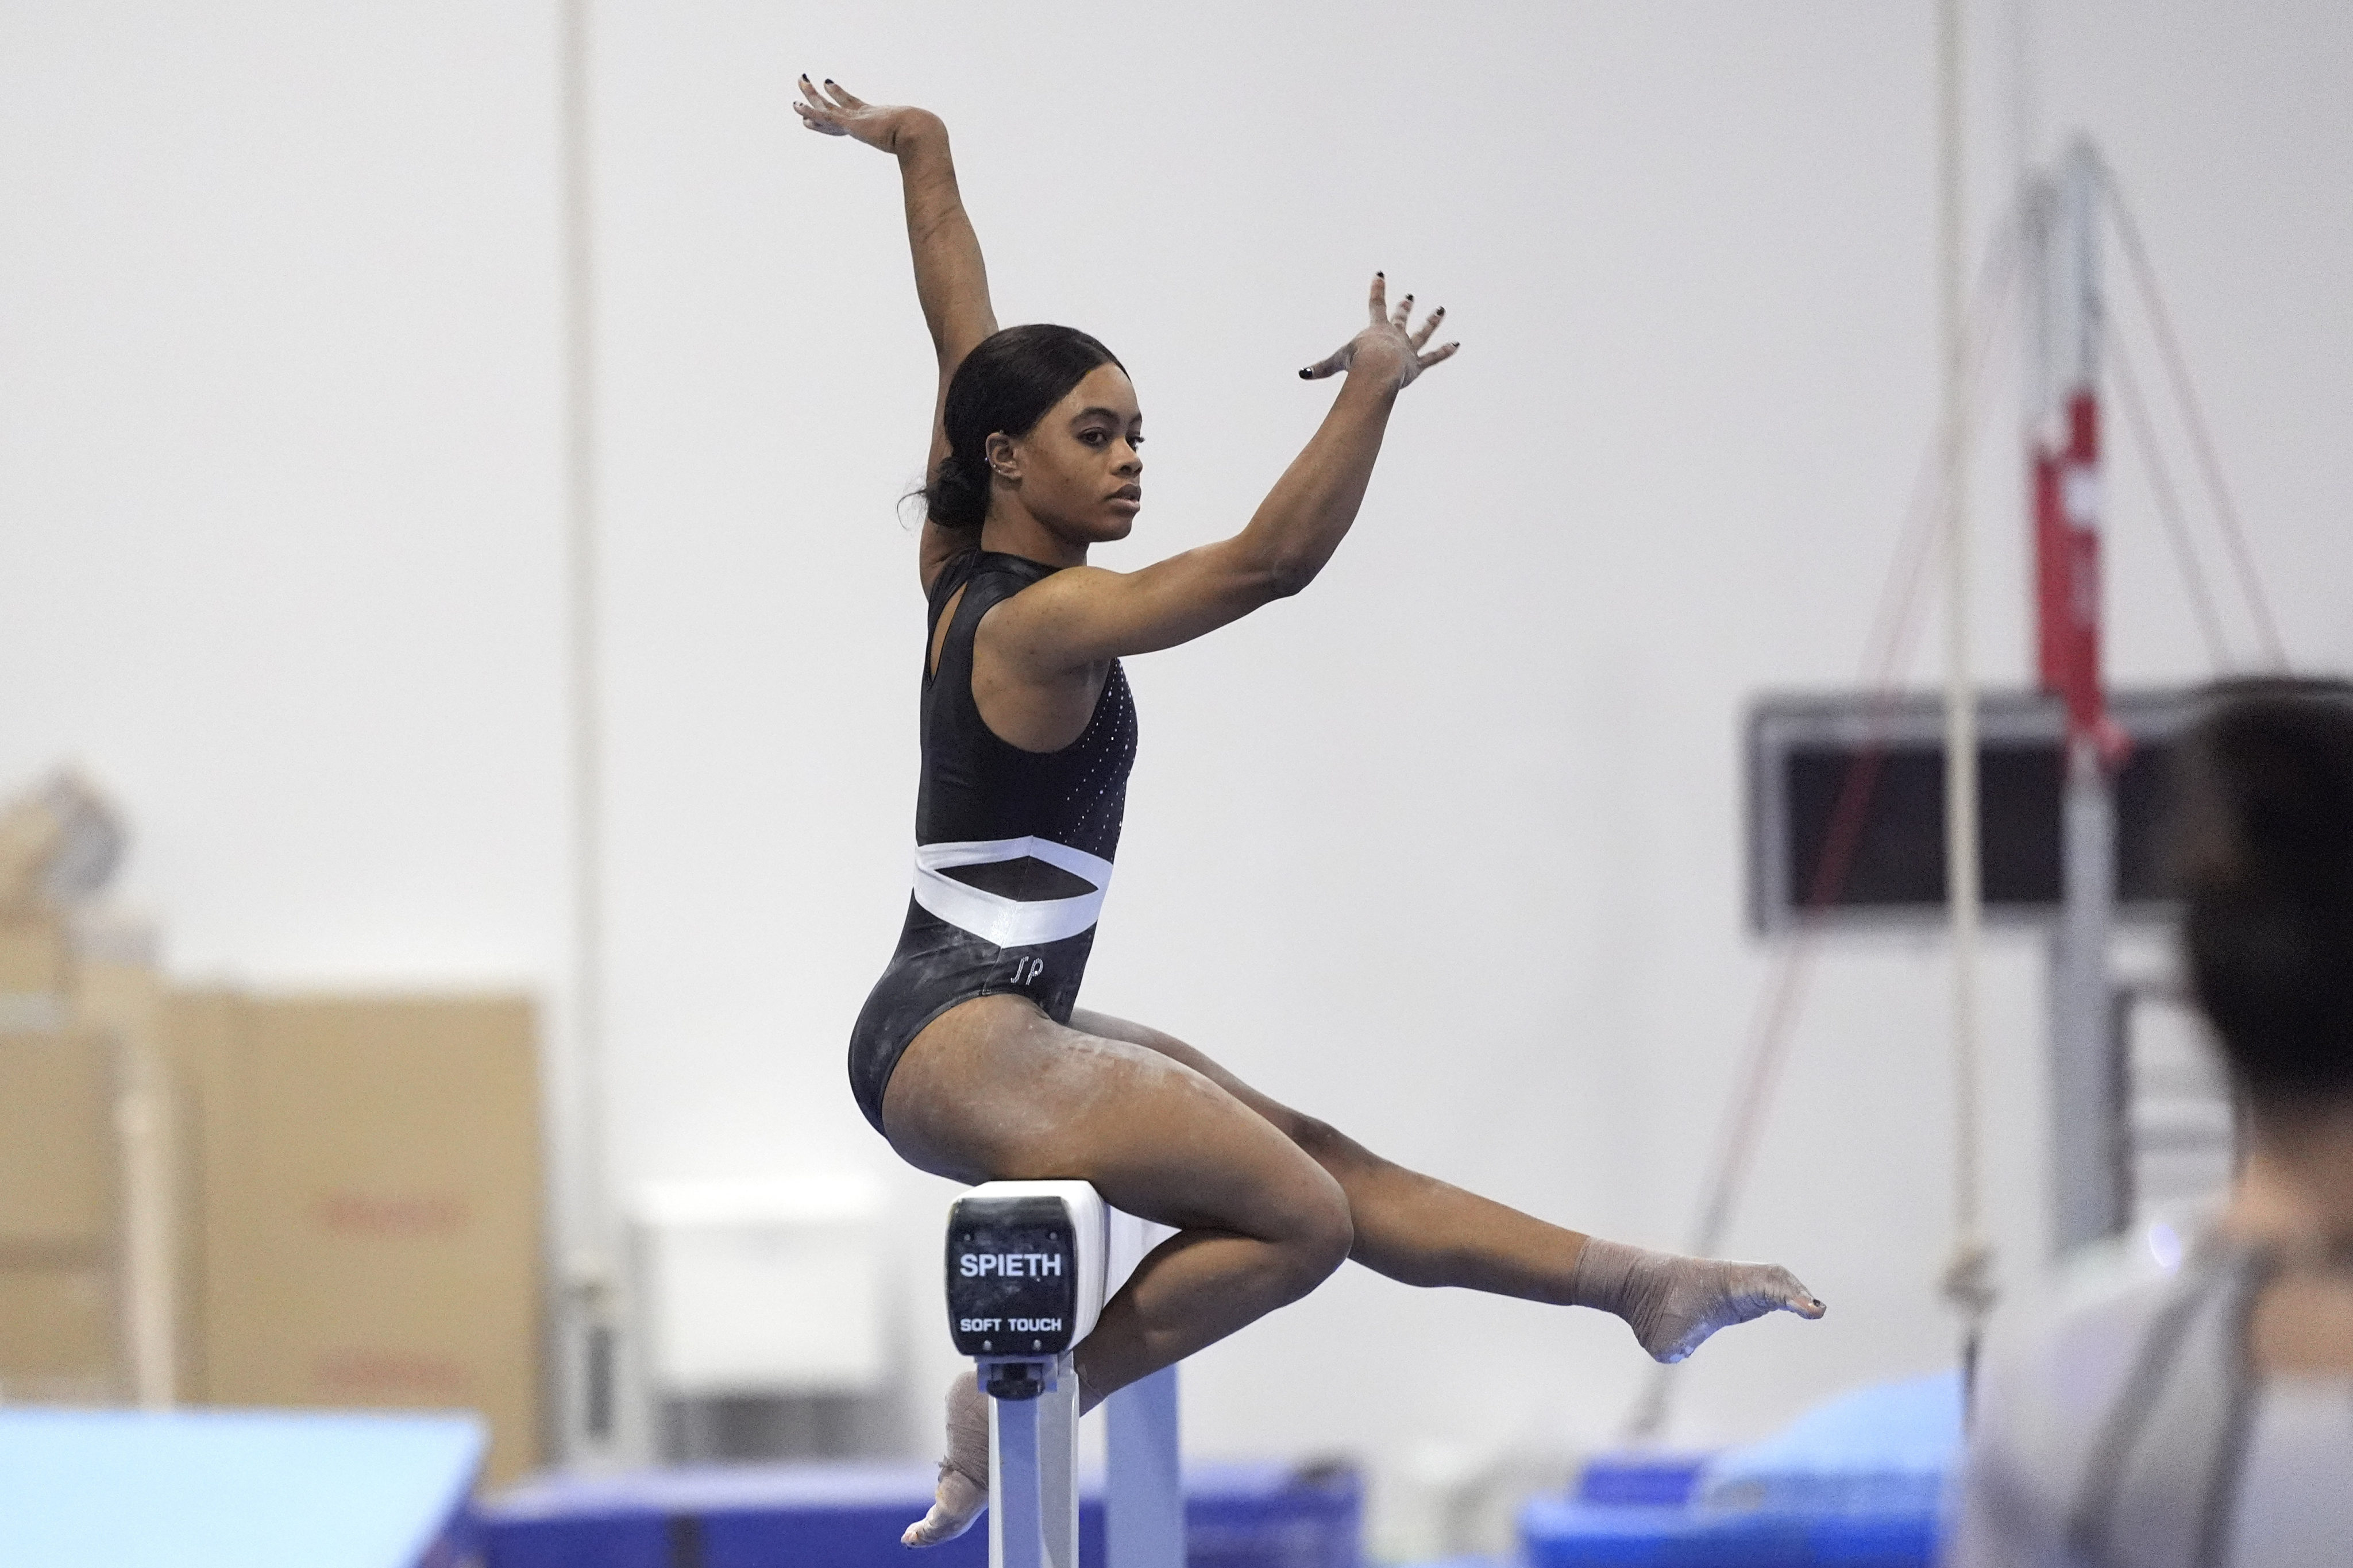 Olympic gold medallist and gymnast Gabby Douglas competes at the American Classic in Katy, Texas, on April 27. Photo: AP Photo